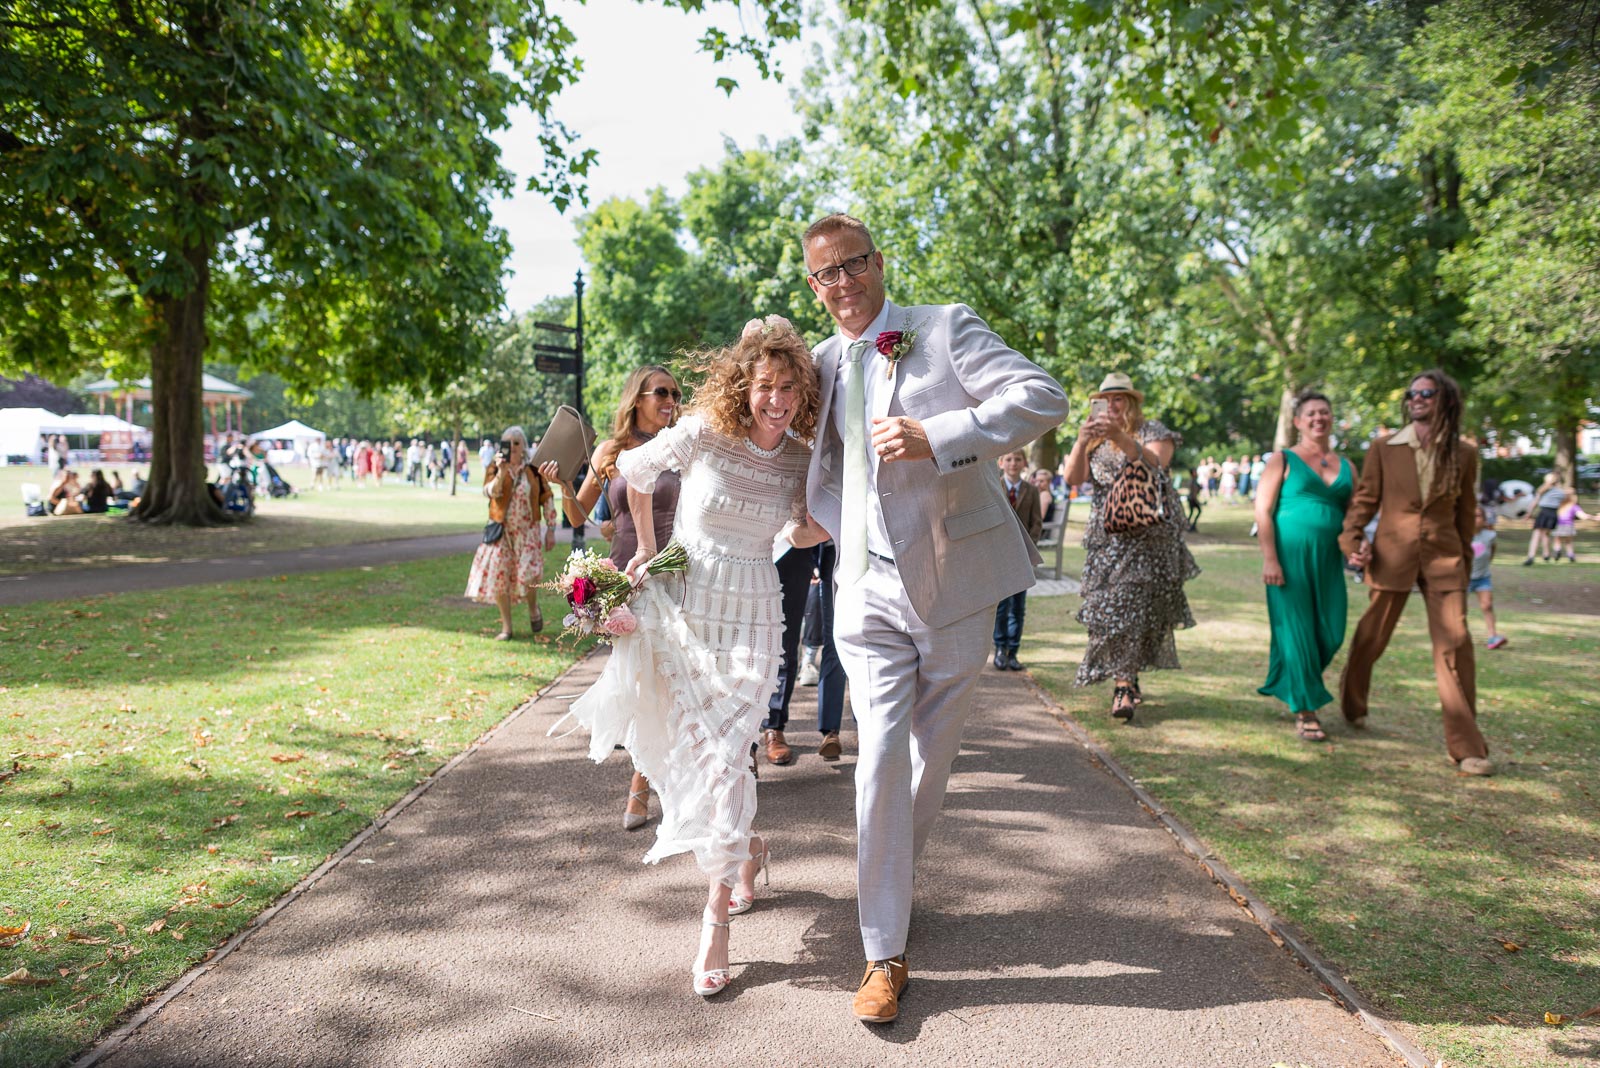 Kitty and Will dance to the wedding venue after their wedding in the Band Stand at Queens Park in London.